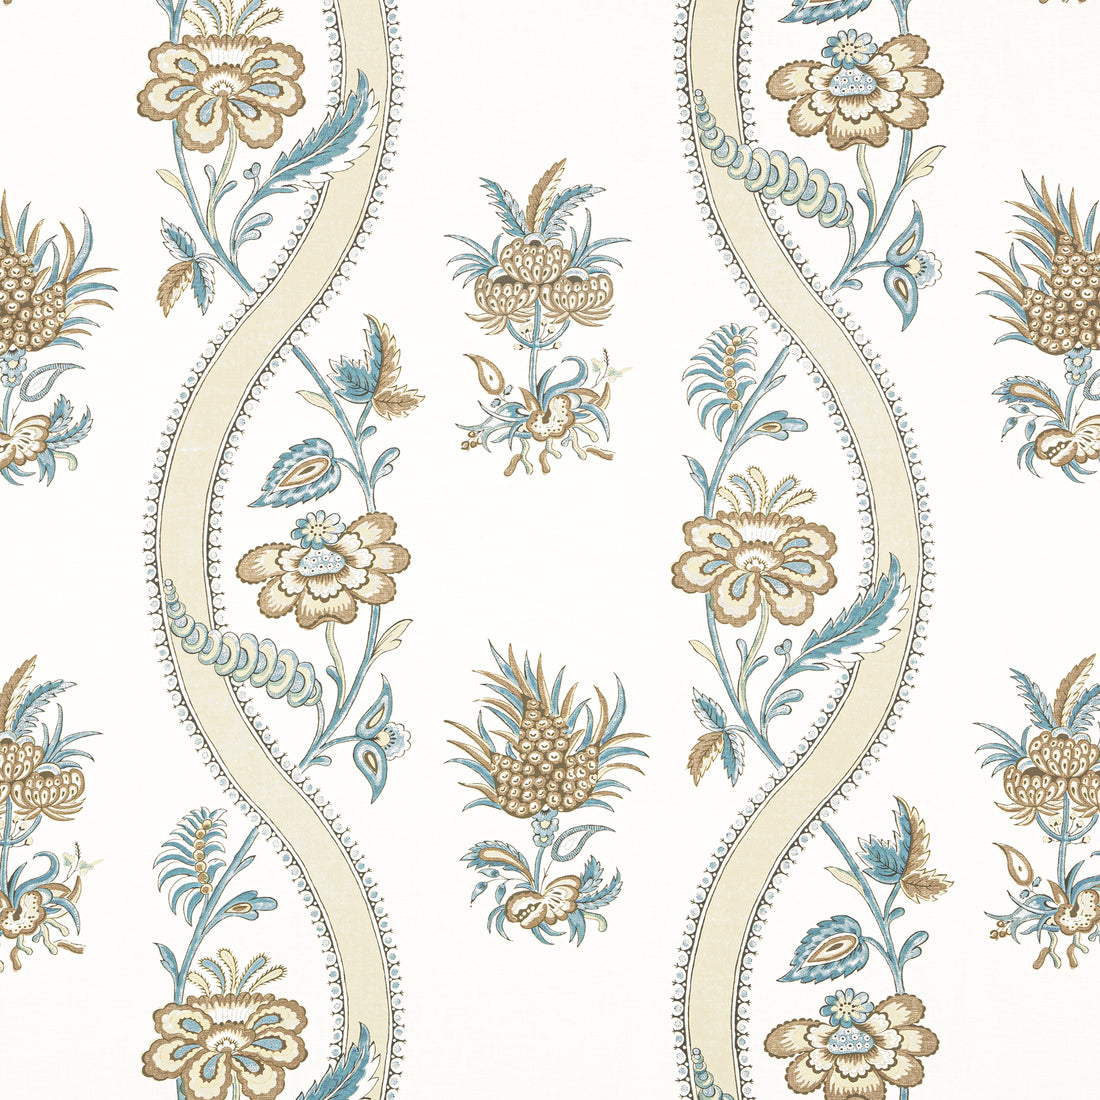 Ribbon Floral fabric in beige and spa blue color - pattern number F936425 - by Thibaut in the Indienne collection